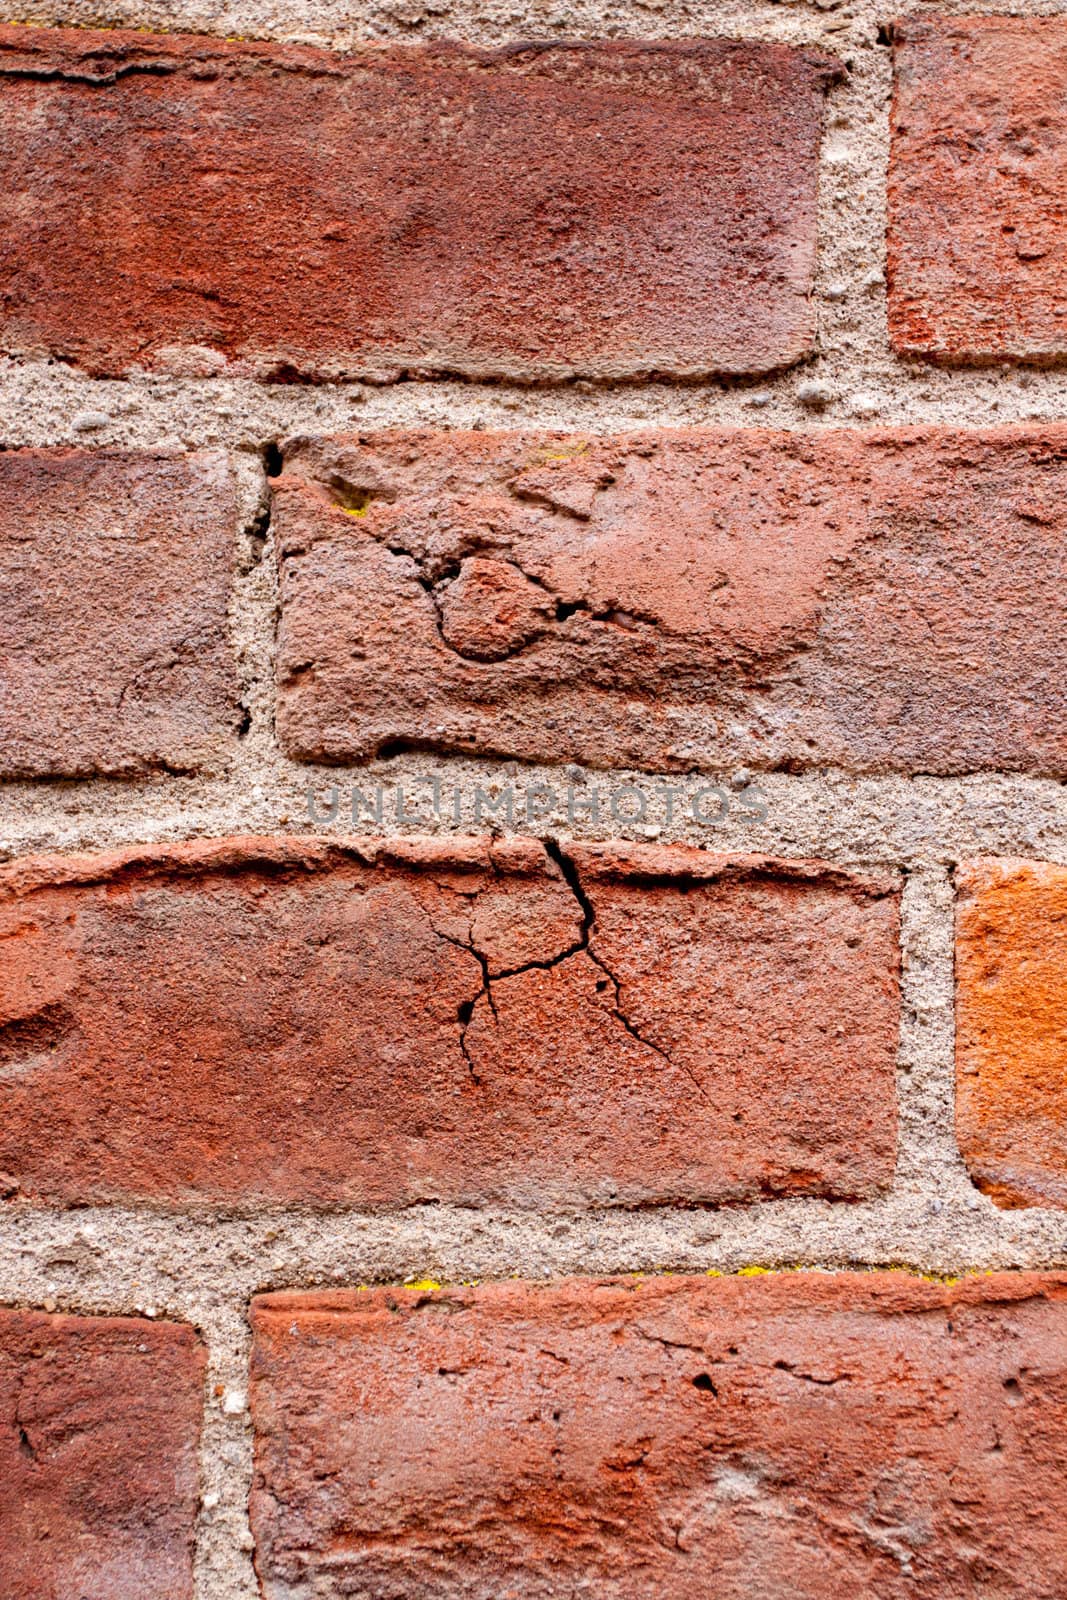 Old bricks are decaying and falling apart on this interesting textured background image.